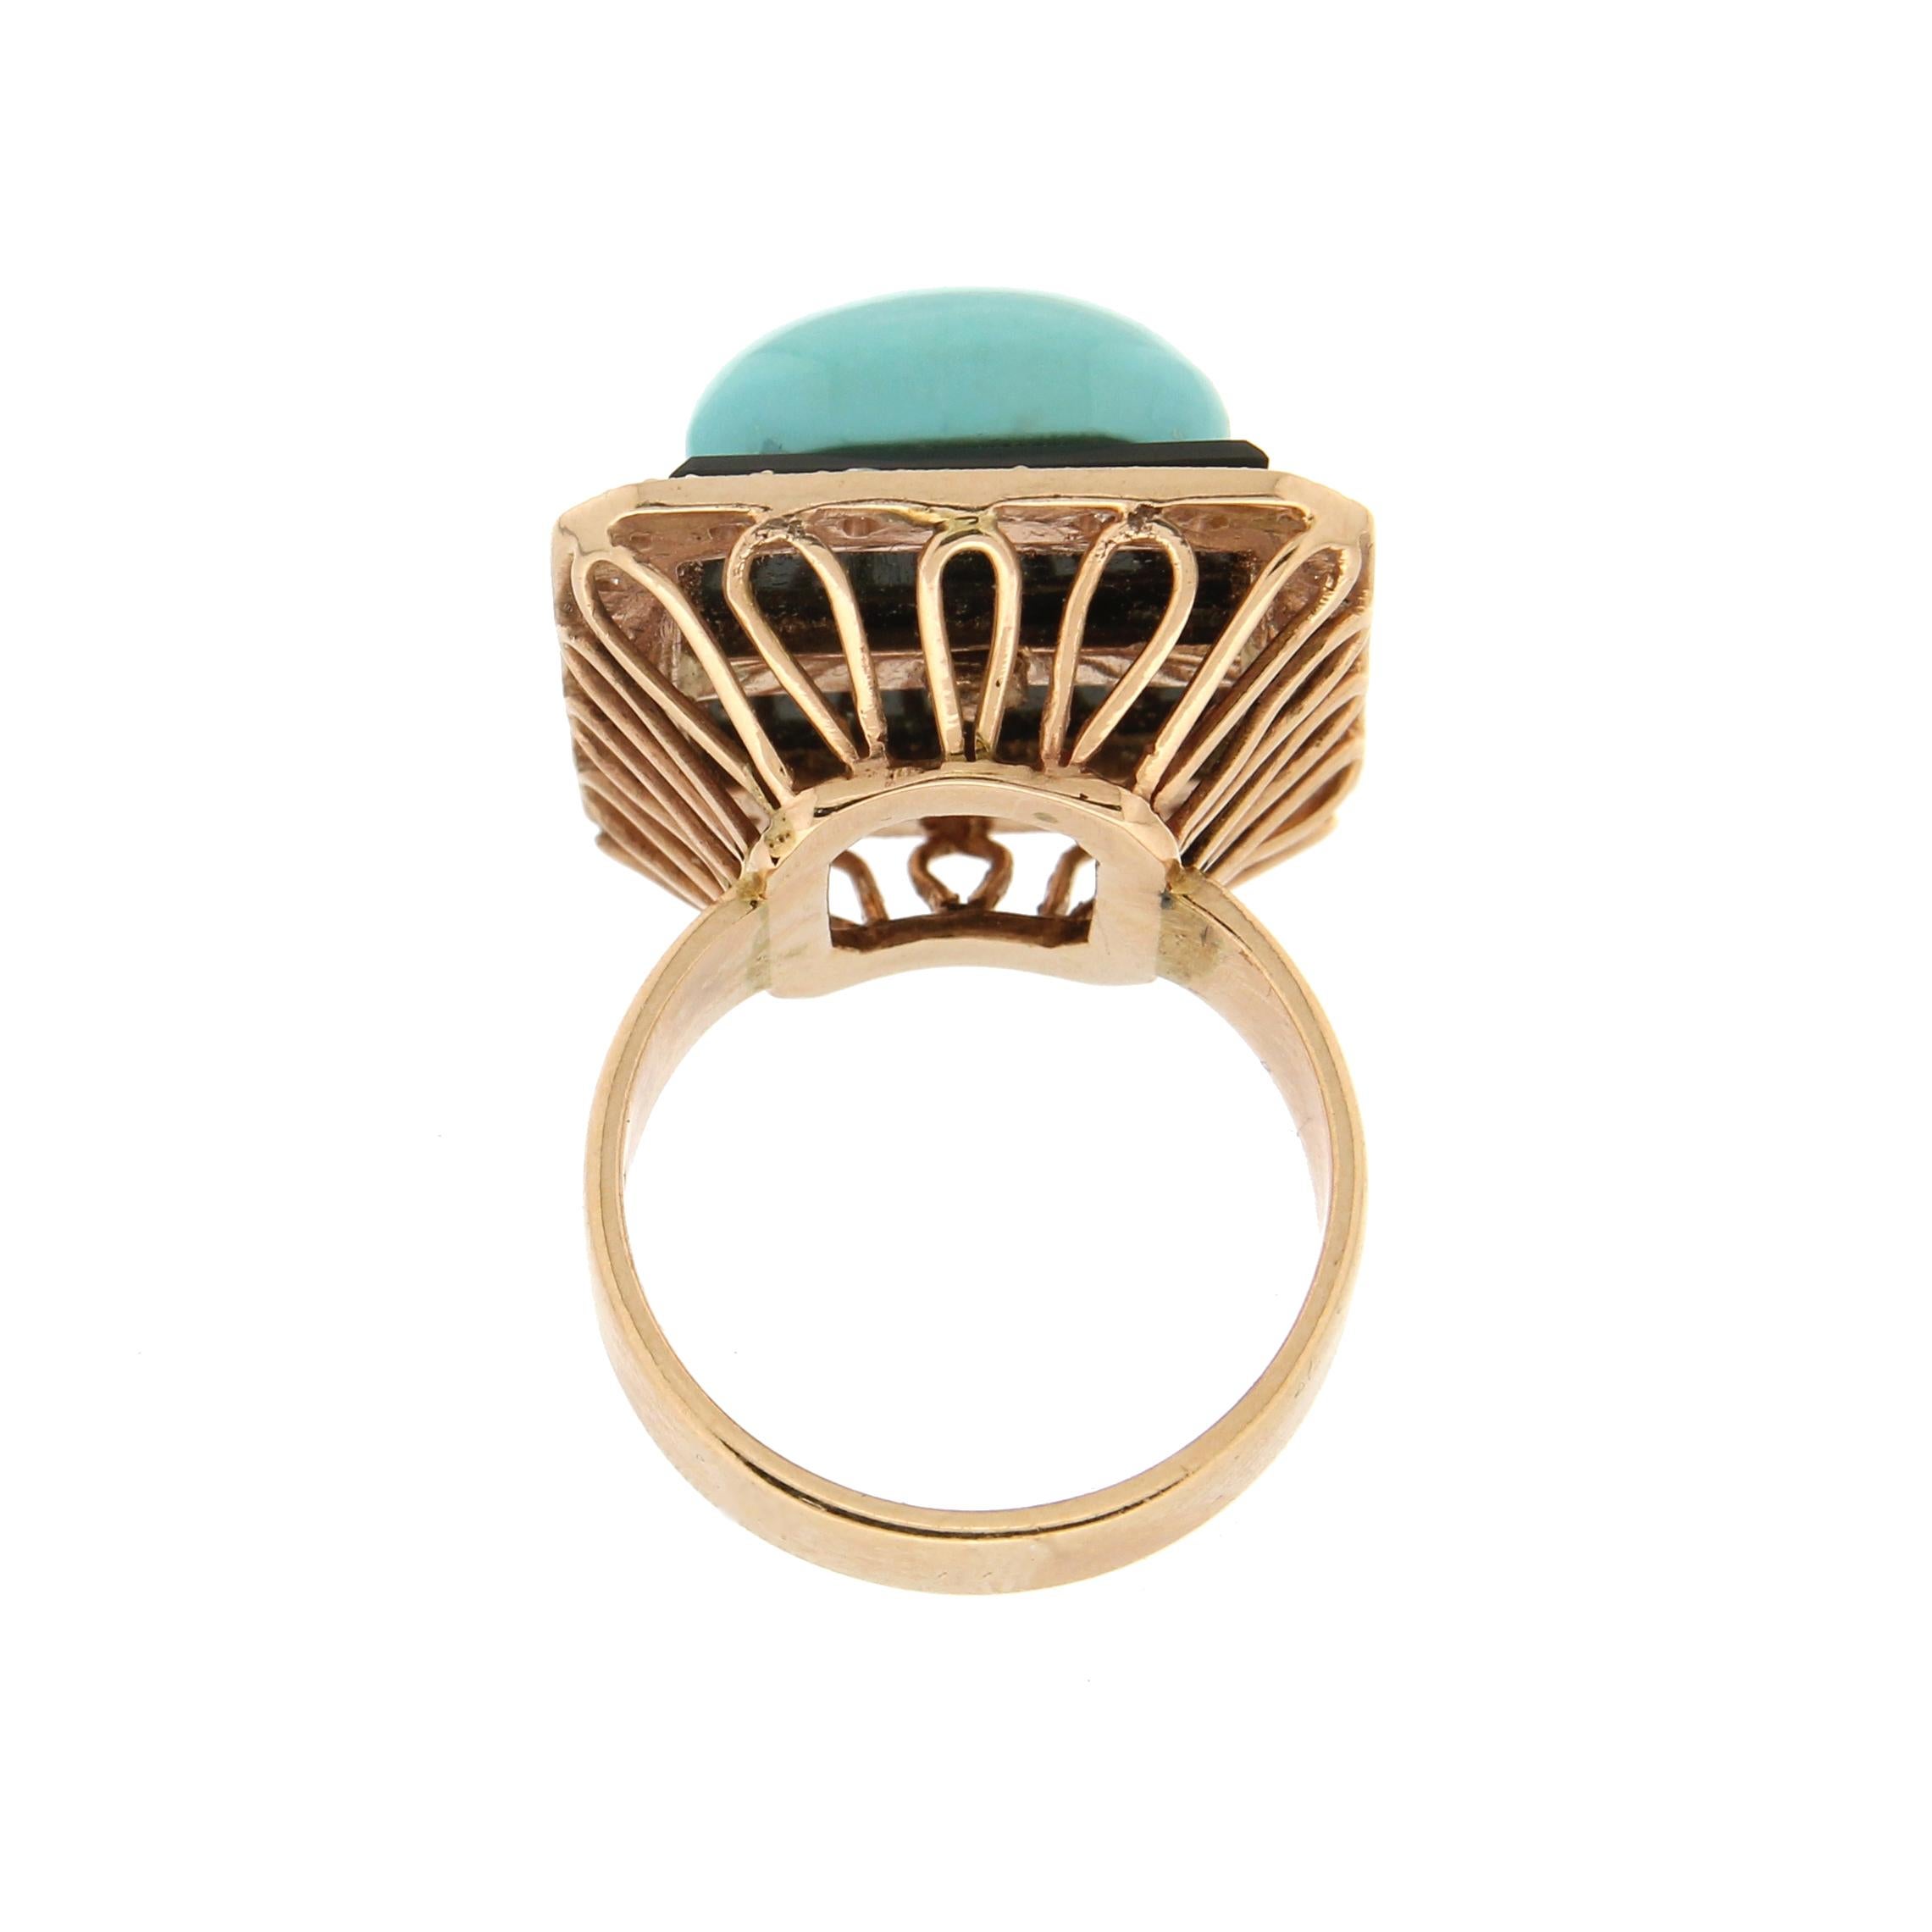 Handcraft Turquoise 14 Karat Yellow Gold Diamonds Onyx Cocktail Ring For Sale 2